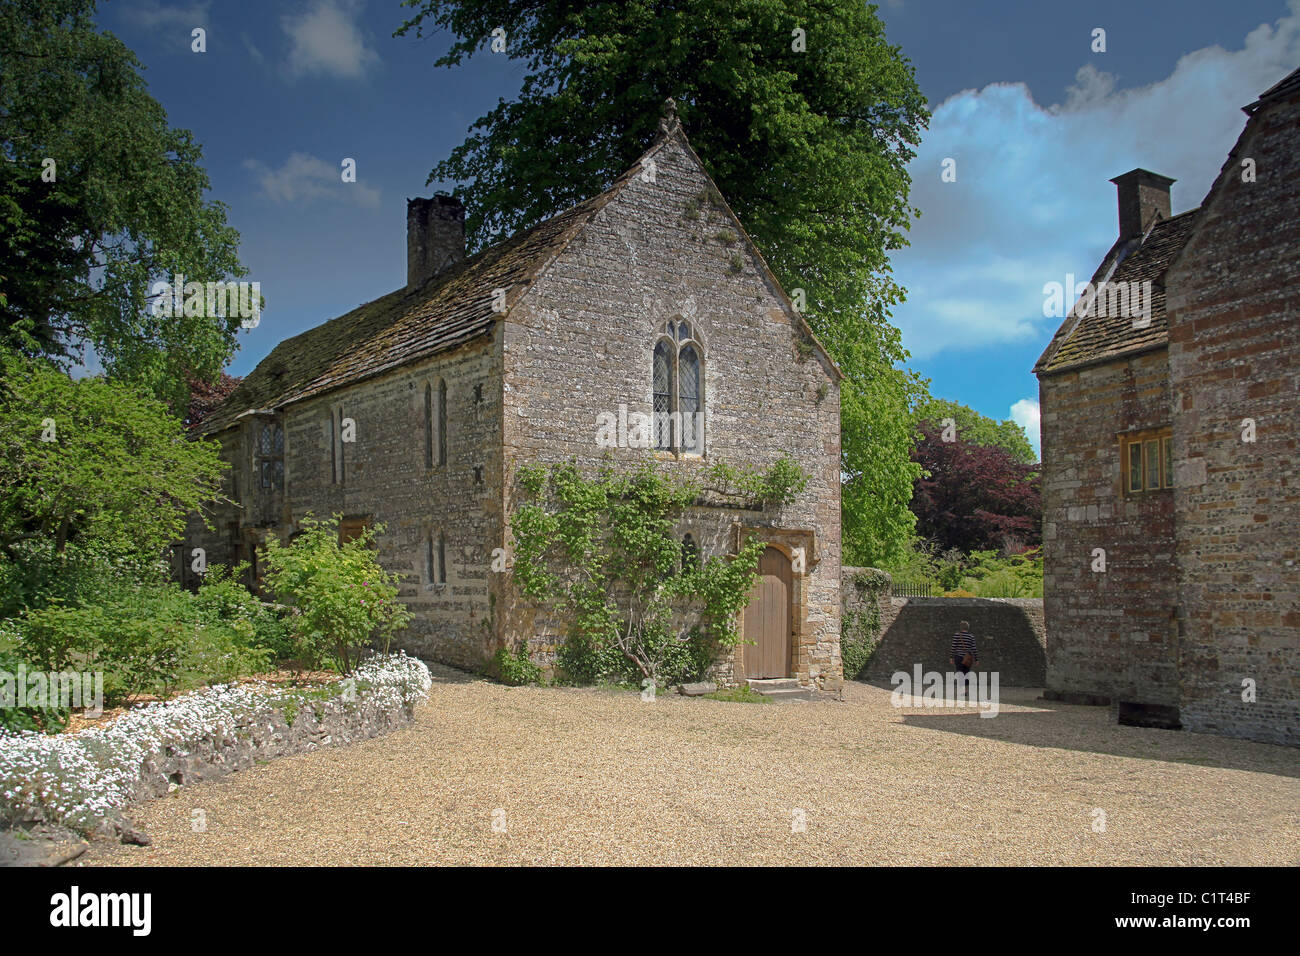 The accommodation block of the former Cerne Abbas Abbey in Dorset, England, UK Stock Photo